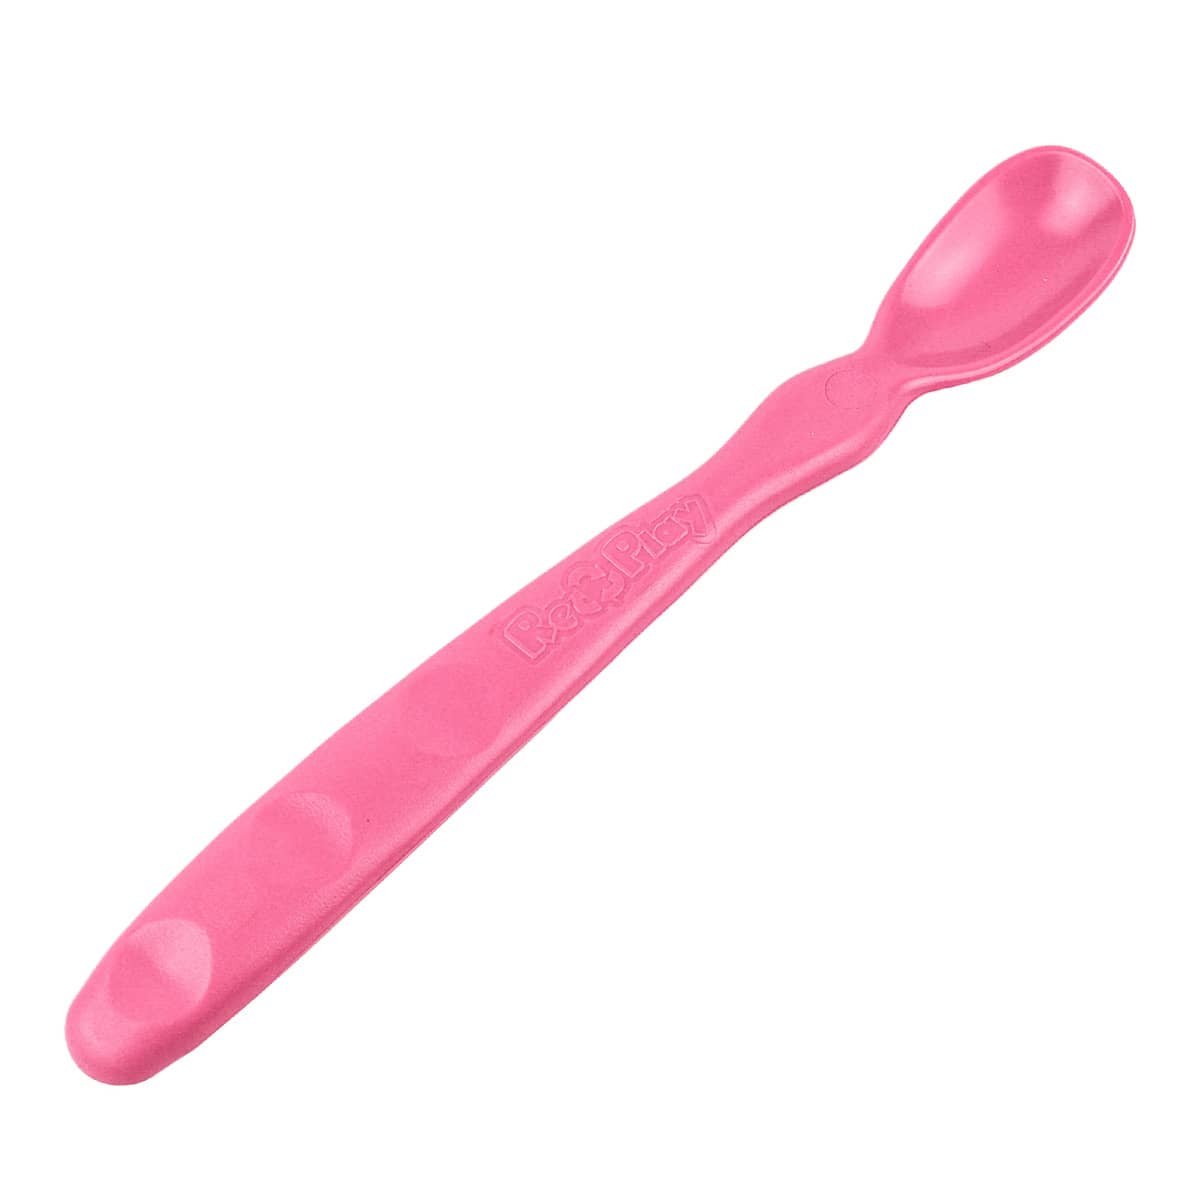 Re-Play Recycled Infant Spoon - Bright Pink